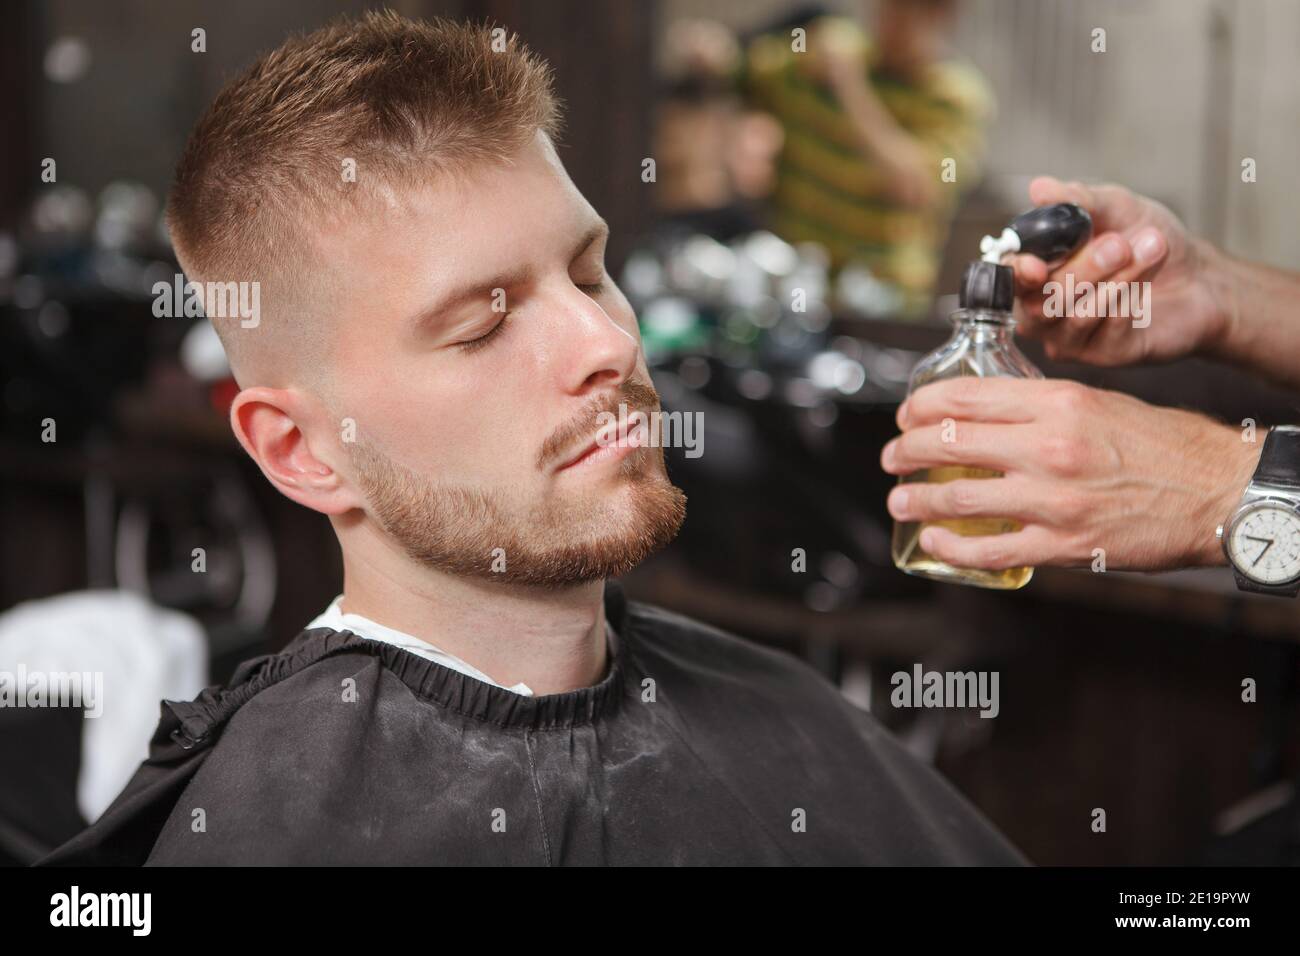 Close up of a male clietn being sprayed with cologne at the barbershop after getting a new haircut and shaving beard Stock Photo